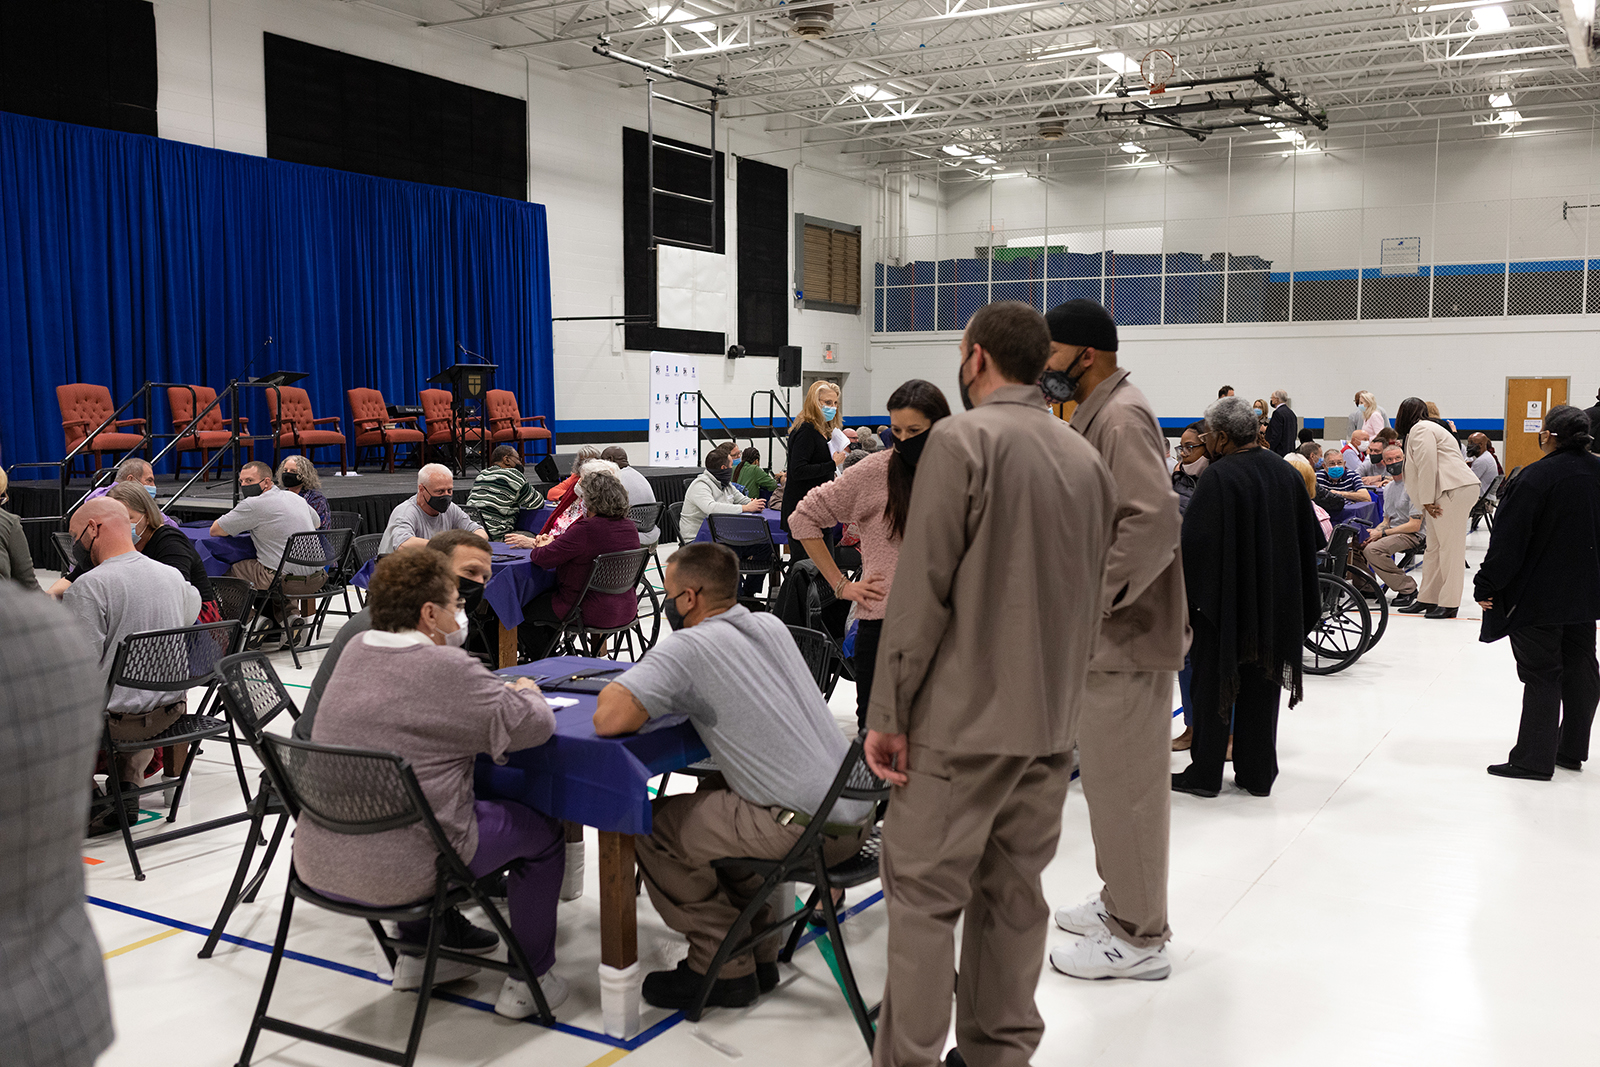 Graduating inmates visit with guests during the College at Southeastern graduation ceremony, Wednesday, Dec. 15, 2021, at Nash Correctional Institution in Nashville, North Carolina. Photo courtesy of Southeastern Baptist Theological Seminary in Wake Forest, North Carolina